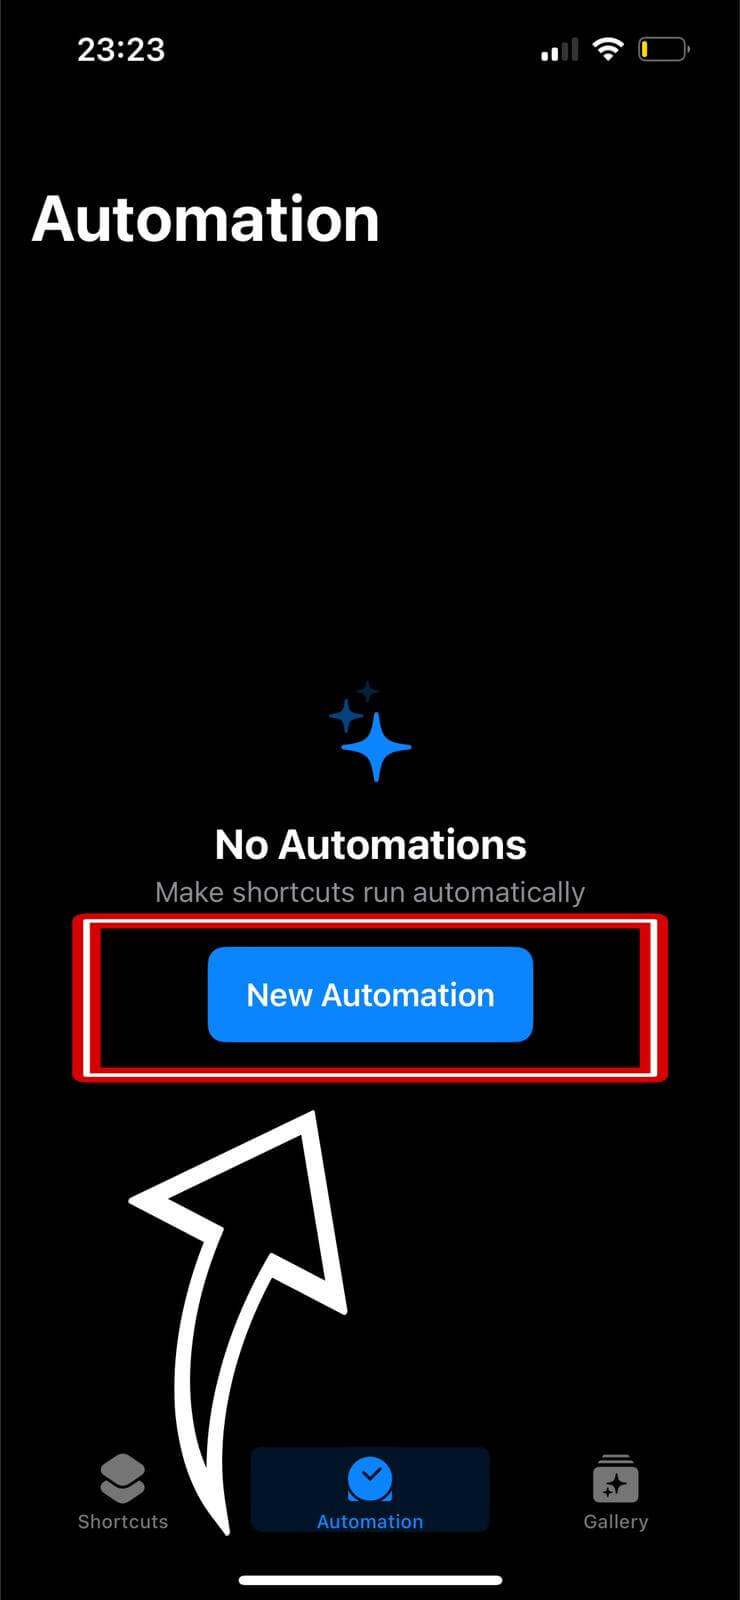 Creating new automation